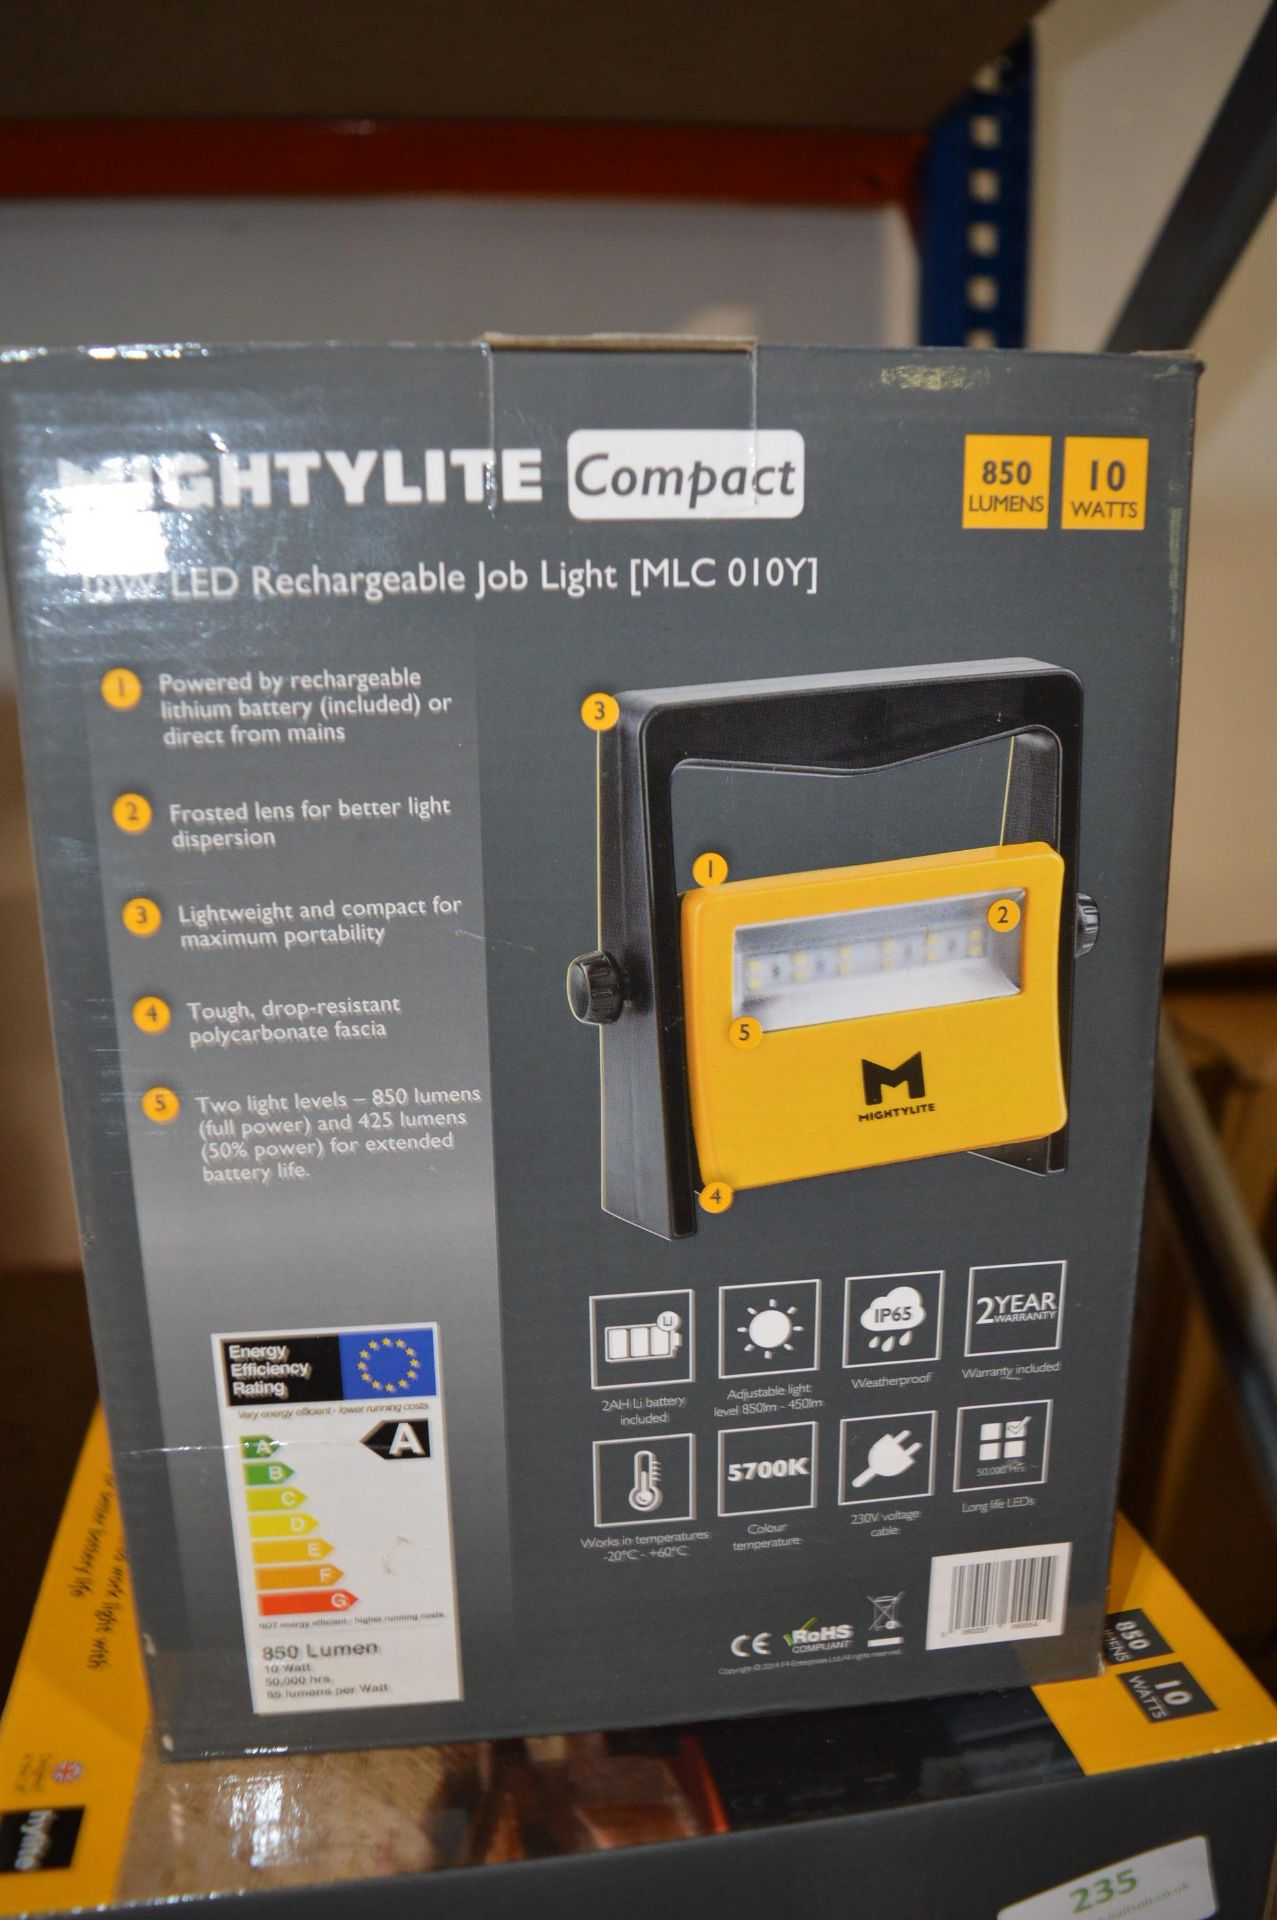 Mighty Light Compact LED Rechargeable Work Light - Image 2 of 2